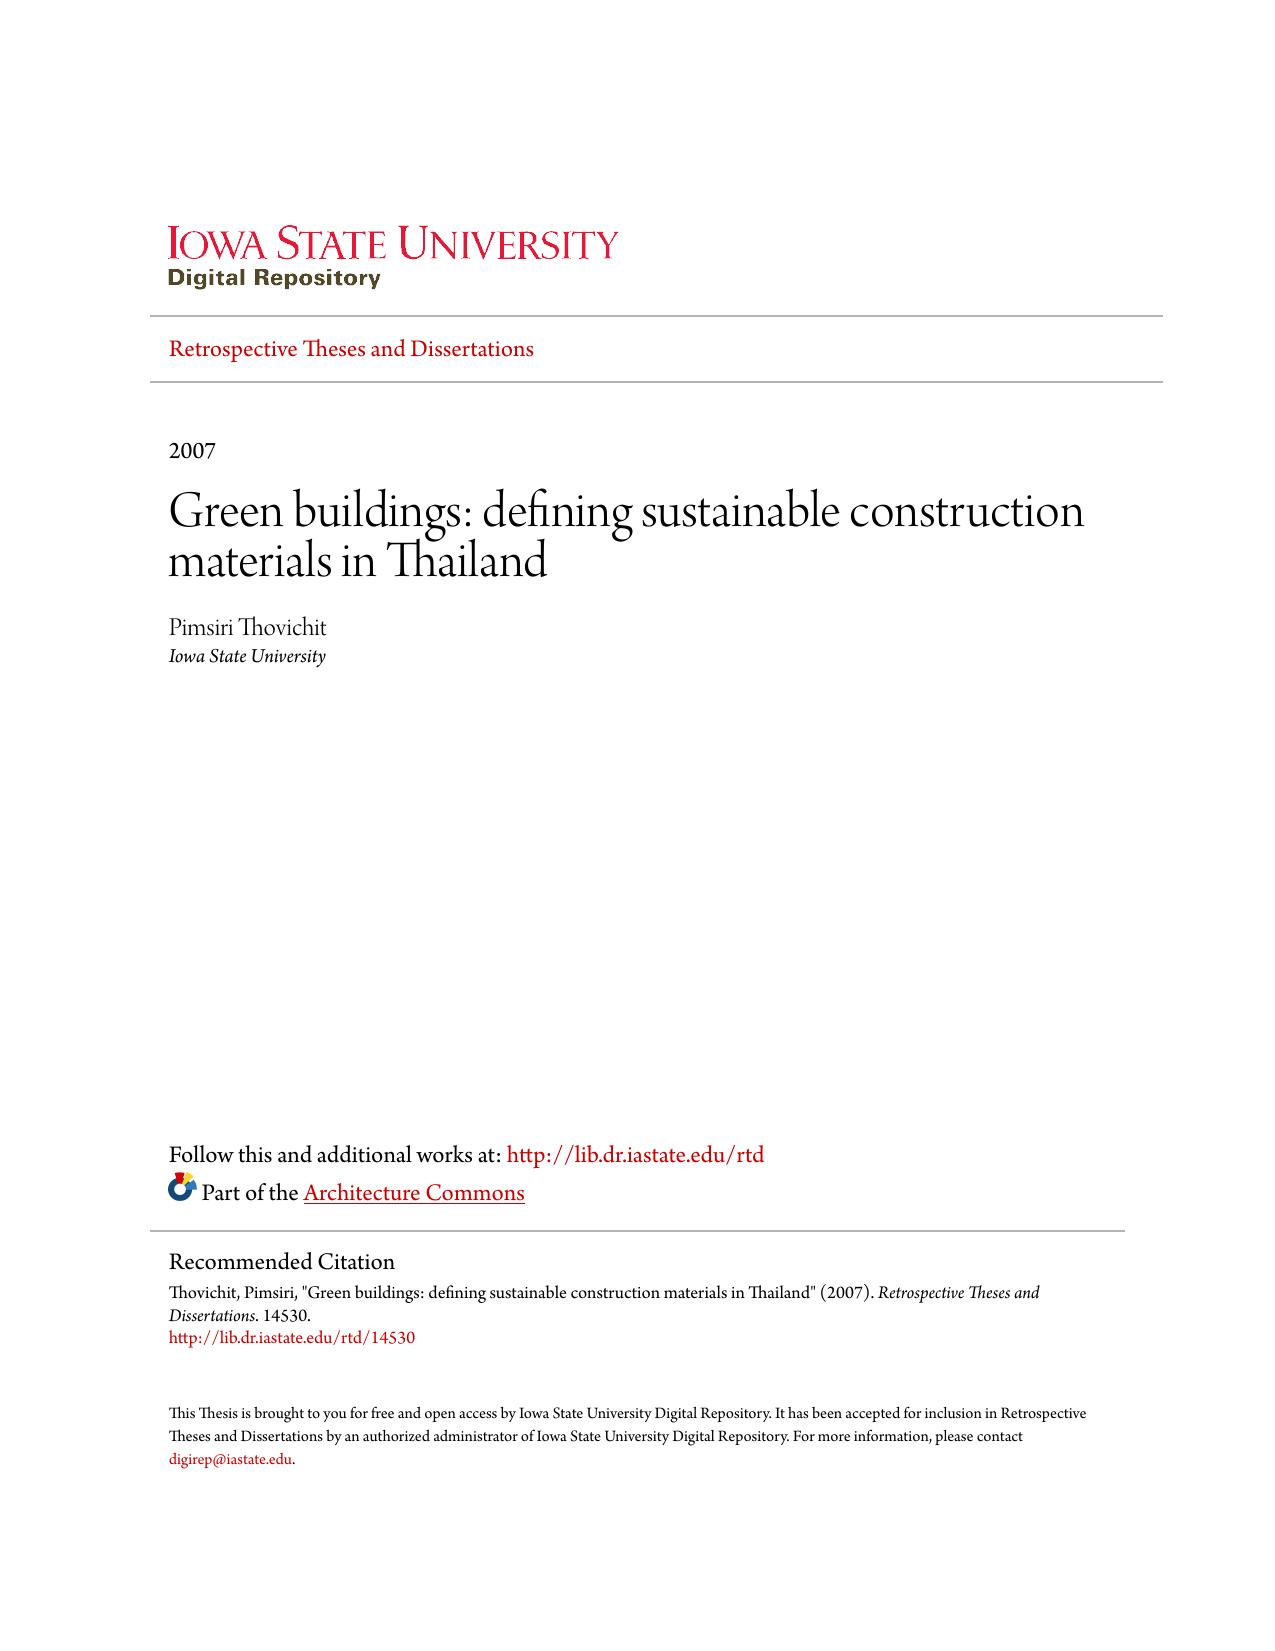 Green buildings: defining sustainable construction materials in Thailand